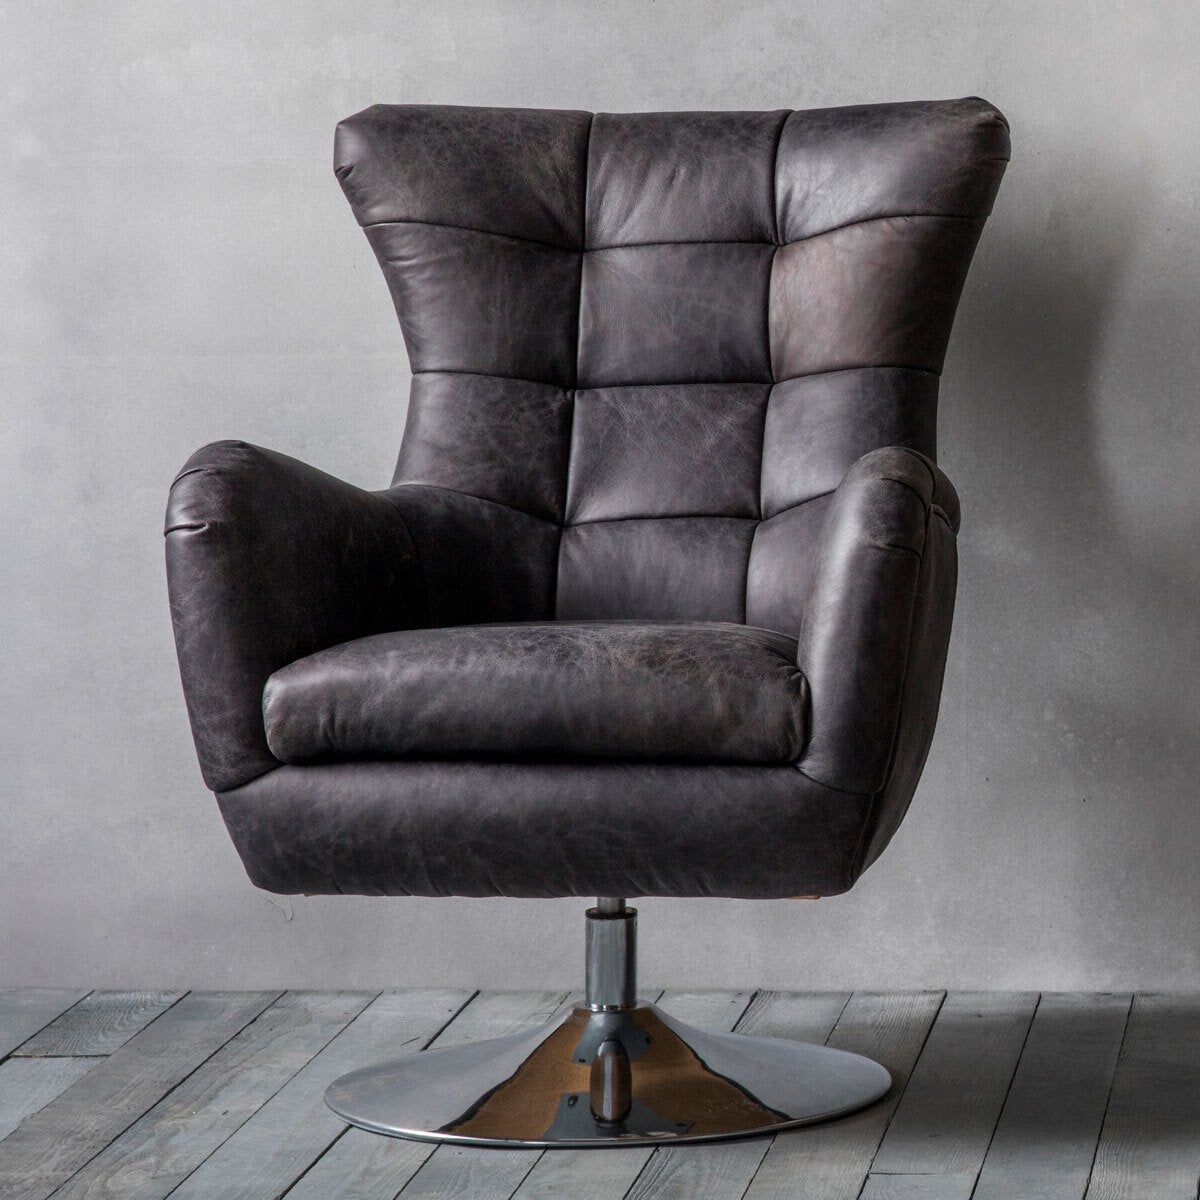 Gallery Newport Top Grain Leather Swivel Chair, Ebony - Signature Retail Stores